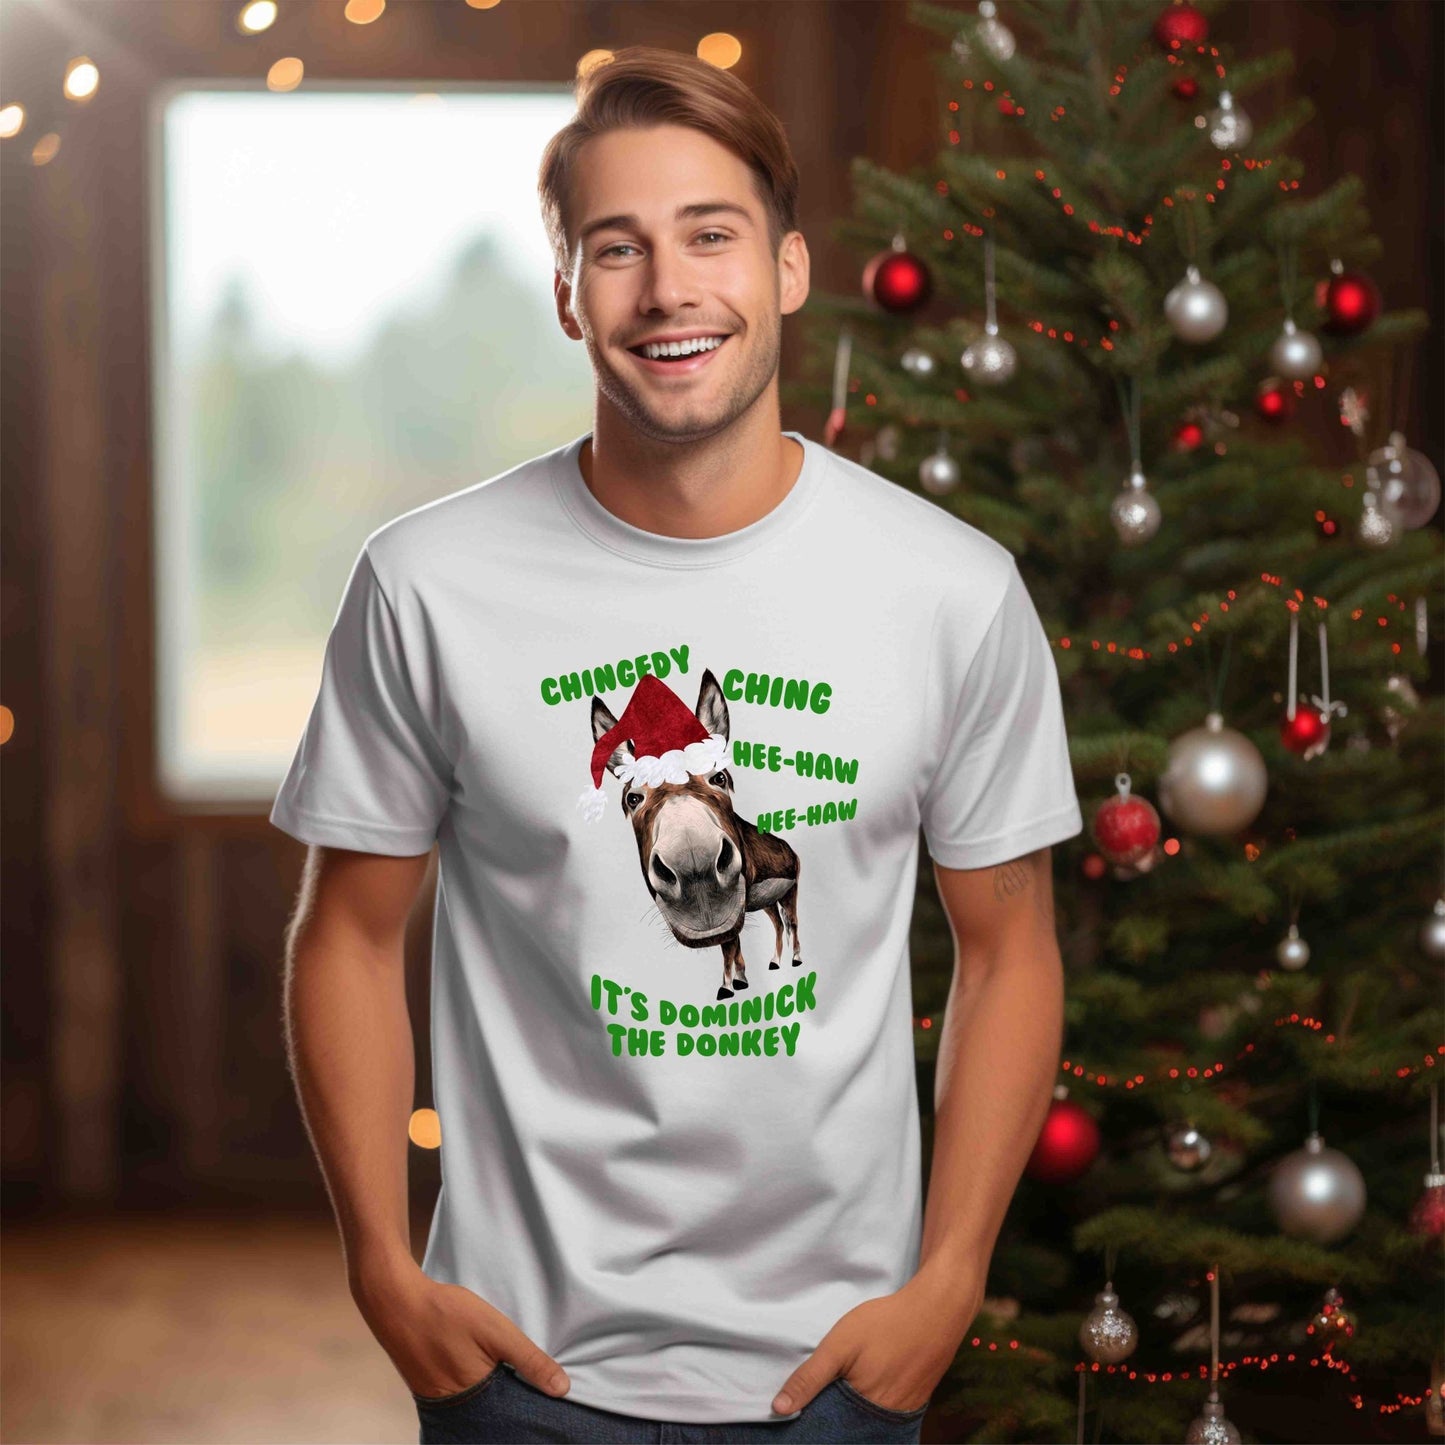 Dominick the Donkey shirt xmas sweatshirt italian christmas carol song shirt gift for her mom mother in law step mom girlfriend - SBS T Shop